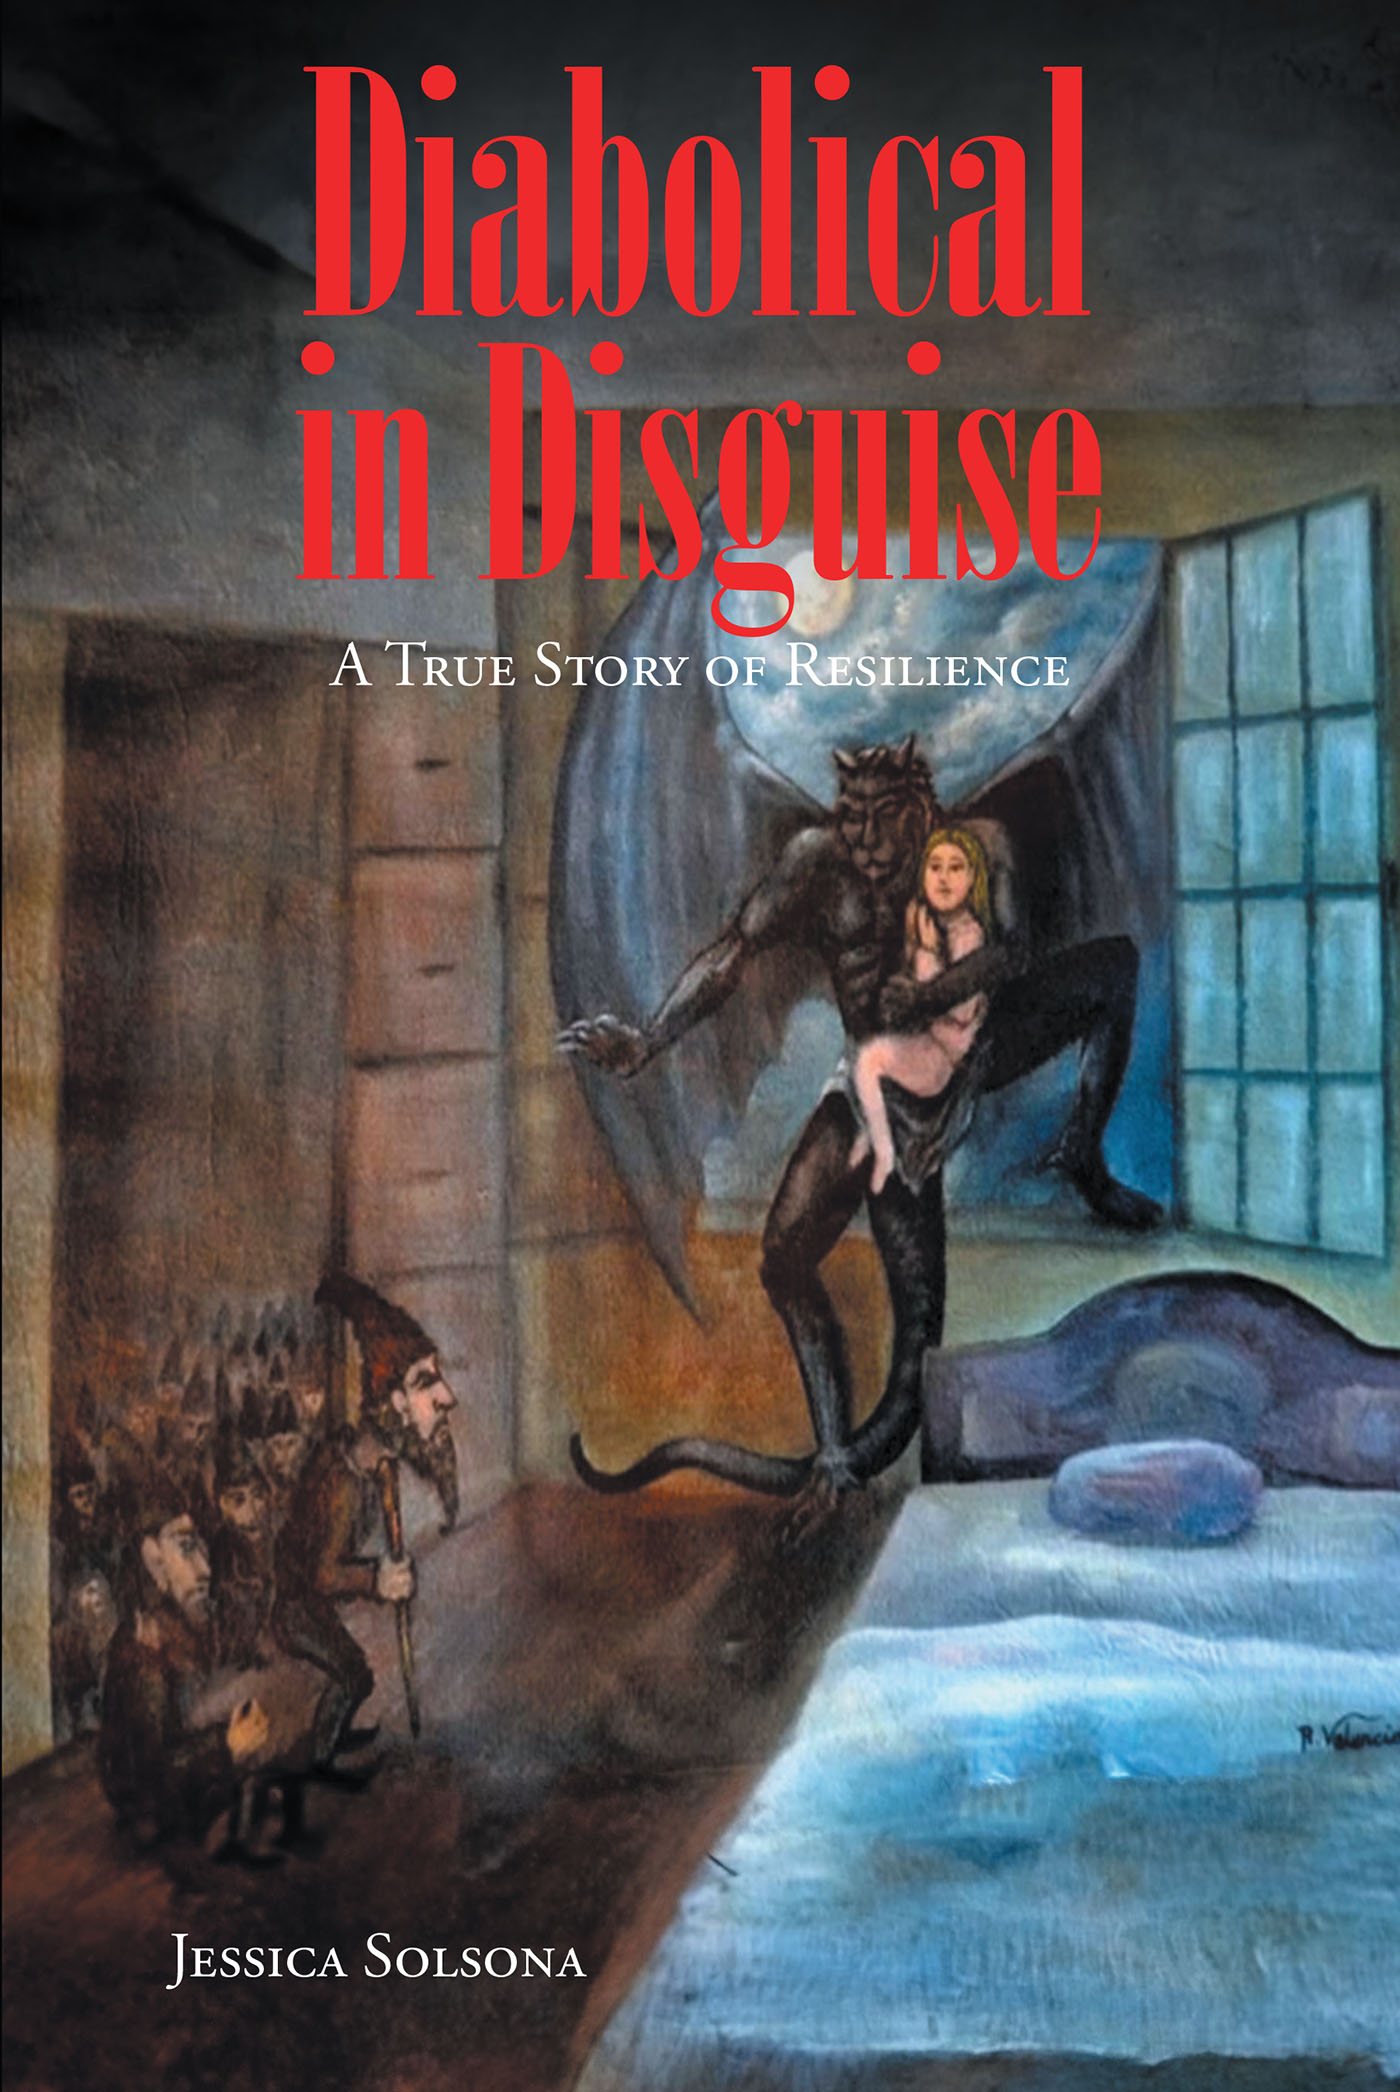 Author Jessica Solsona’s New Book, "Diabolical in Disguise: A True Story of Resilience," Follows the Author Through Years of Abuse and How She Ultimately Found Healing